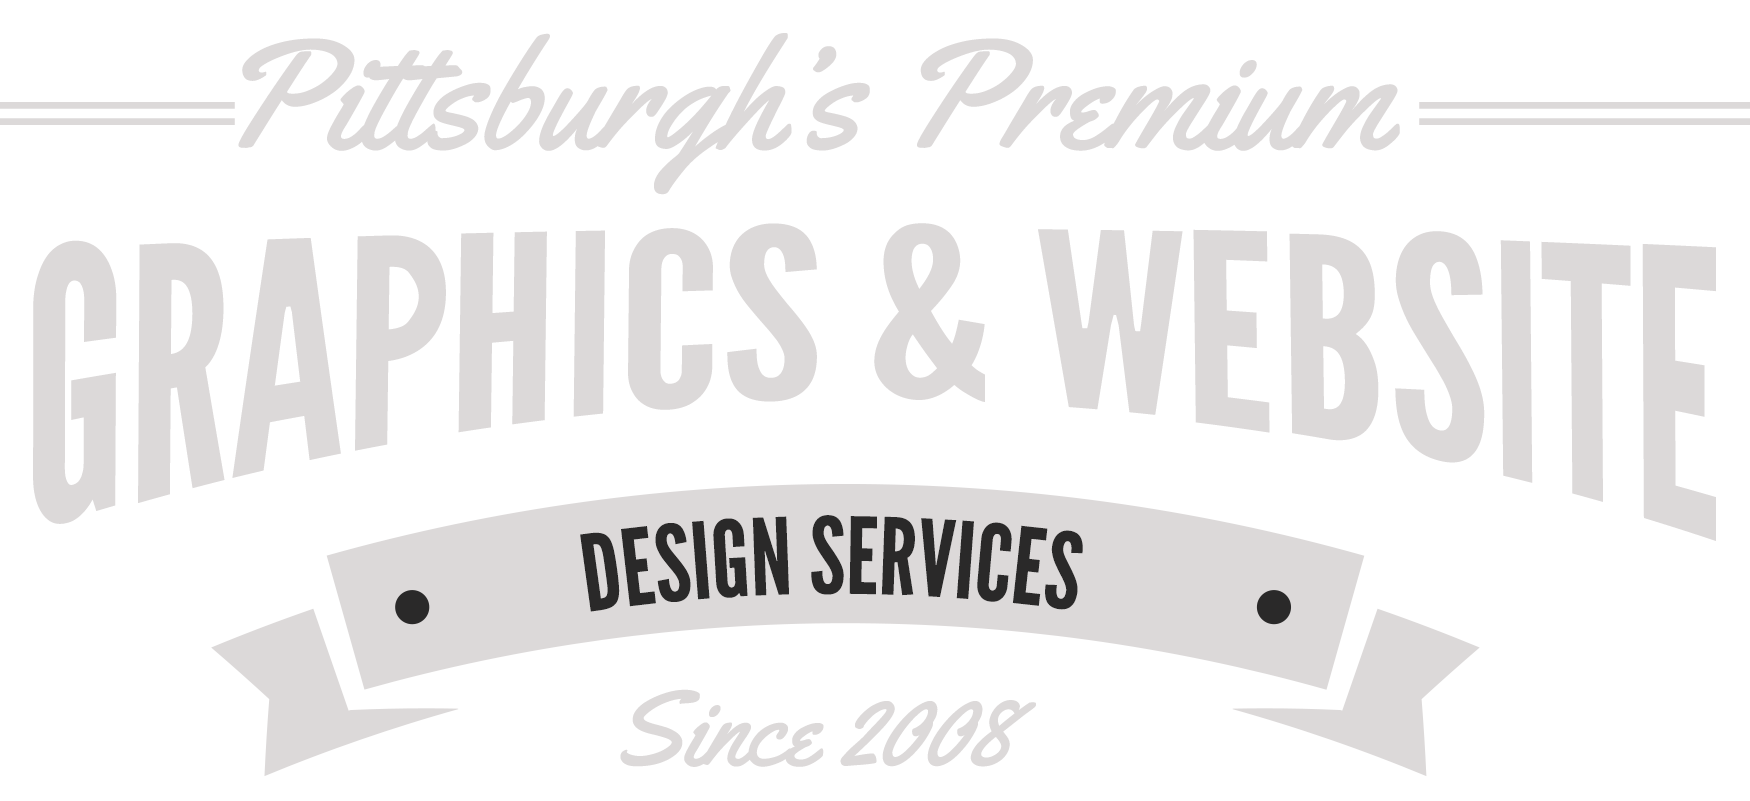 TG Graphics and web design badge for pittsburgh pa